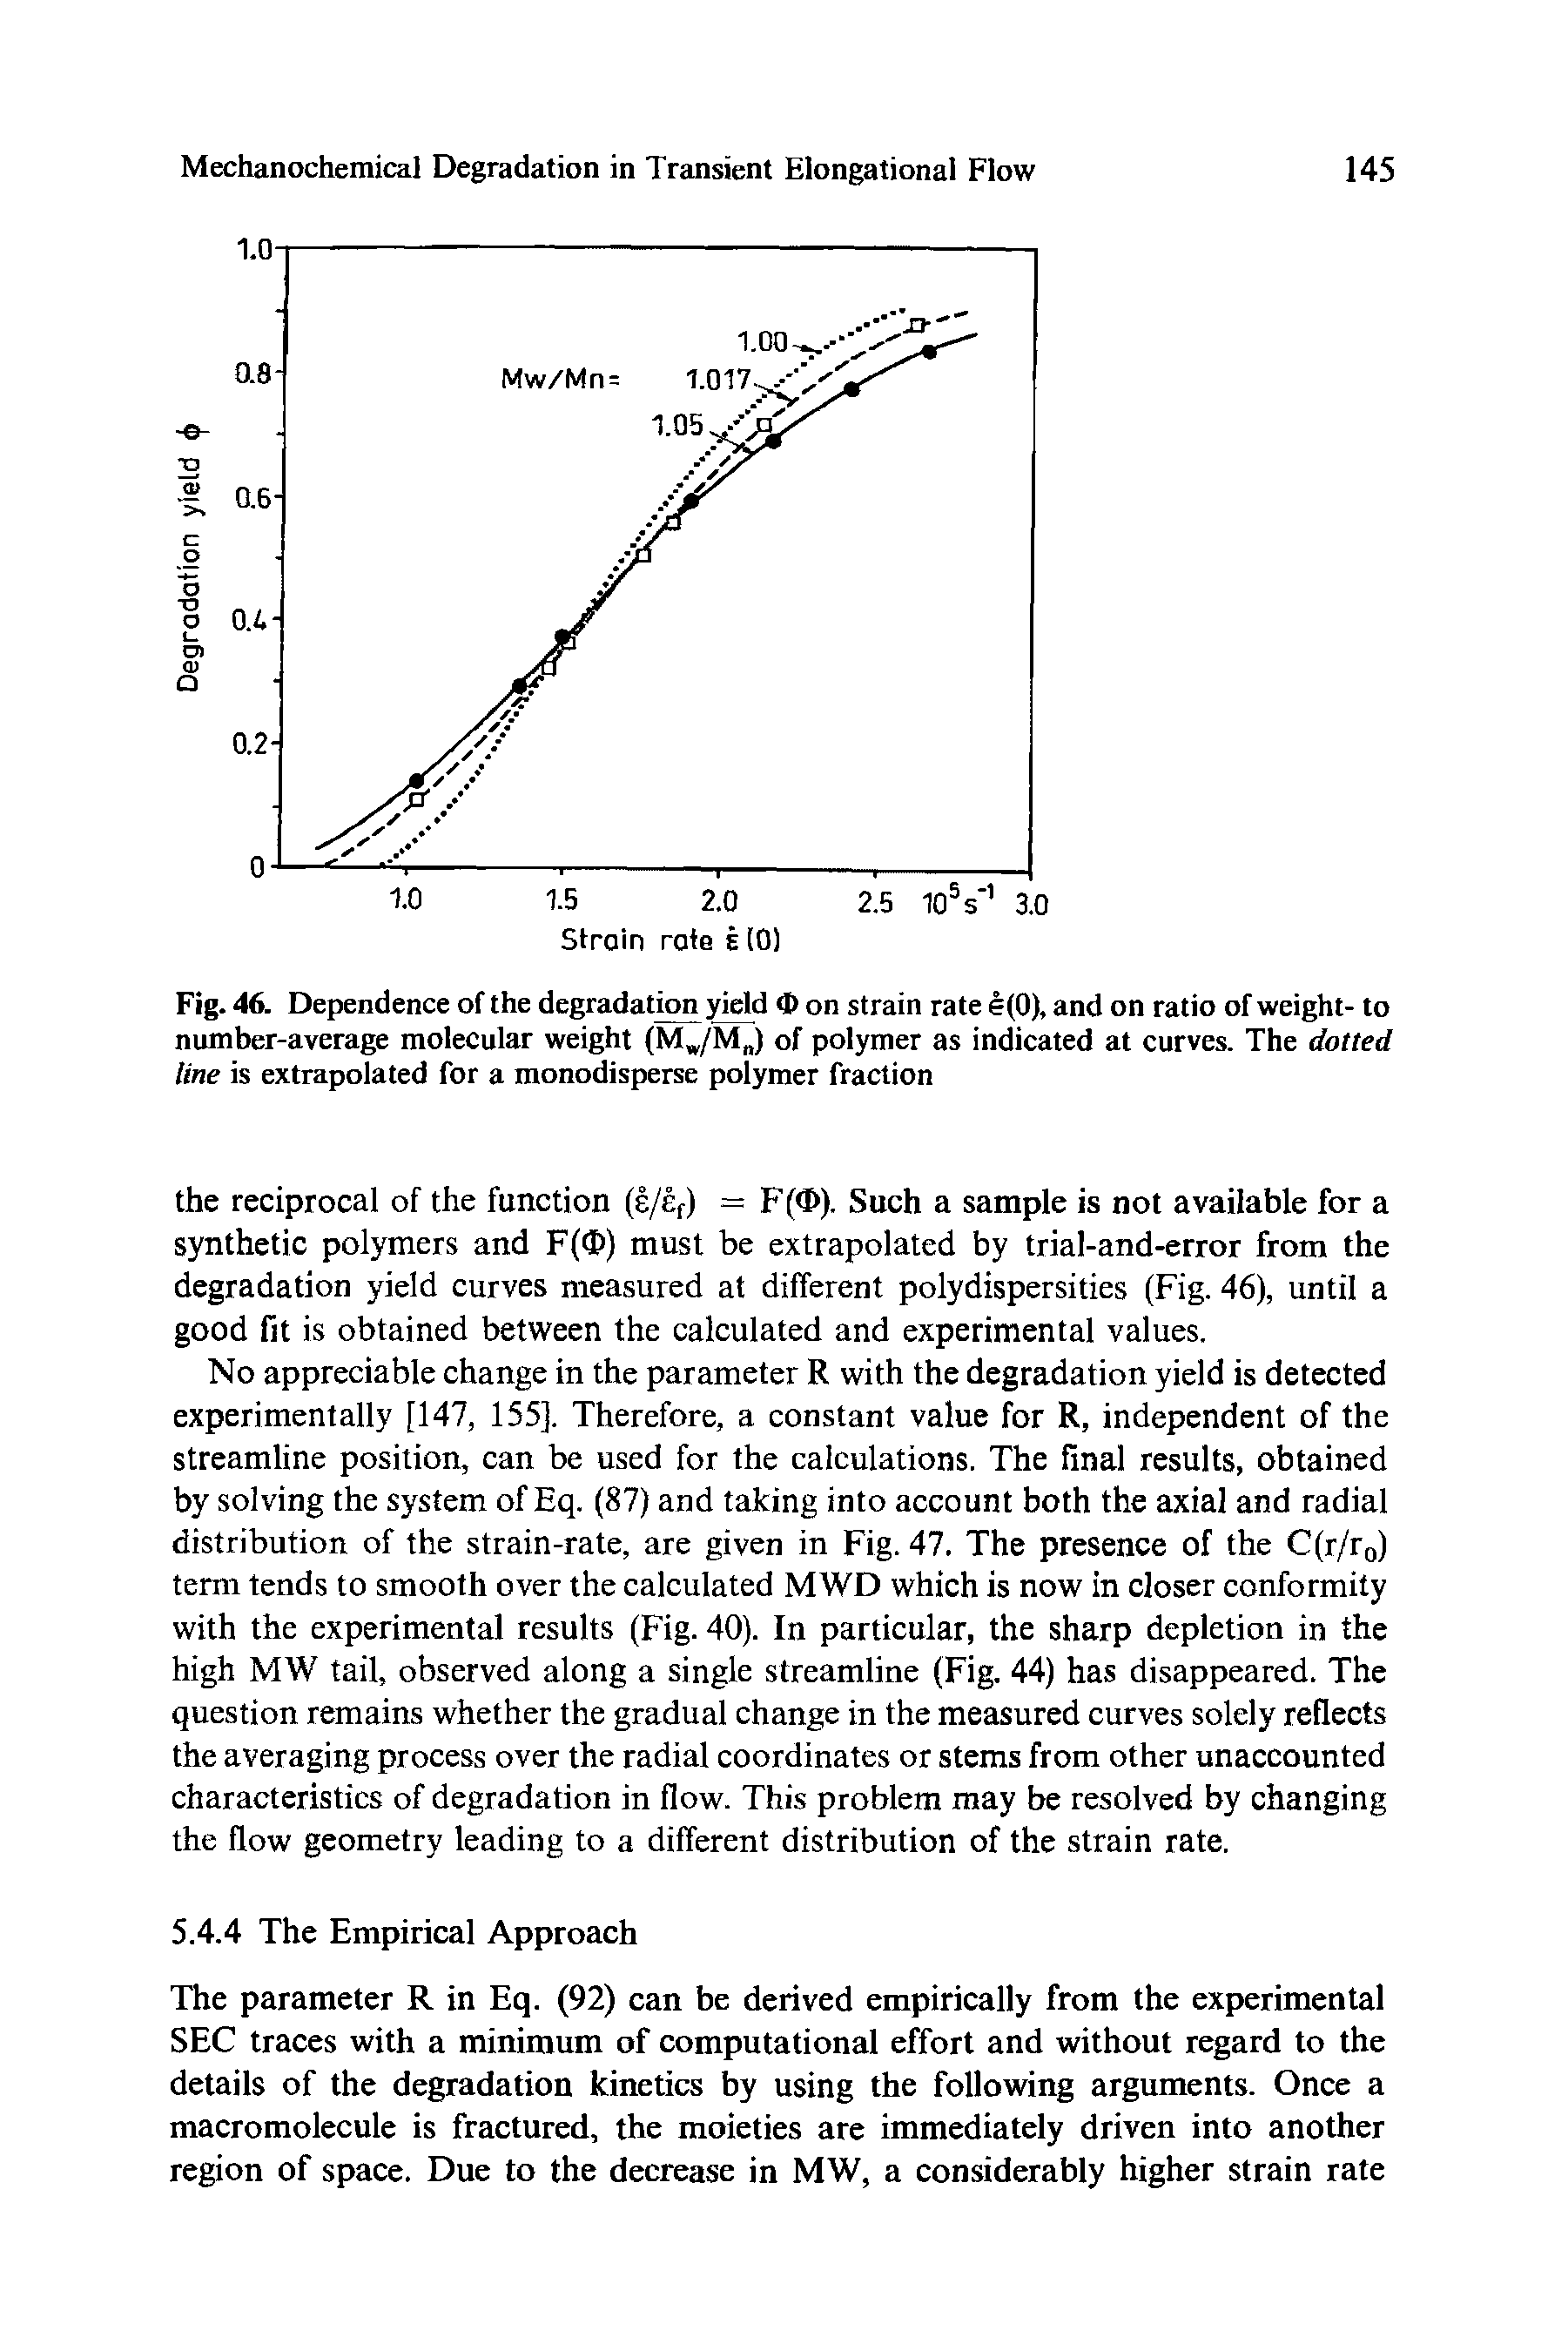 Fig. 46. Dependence of the degradation yield on strain rate e(0), and on ratio of weight- to number-average molecular weight (Mw/M ) of polymer as indicated at curves. The dotted line is extrapolated for a monodisperse polymer fraction...